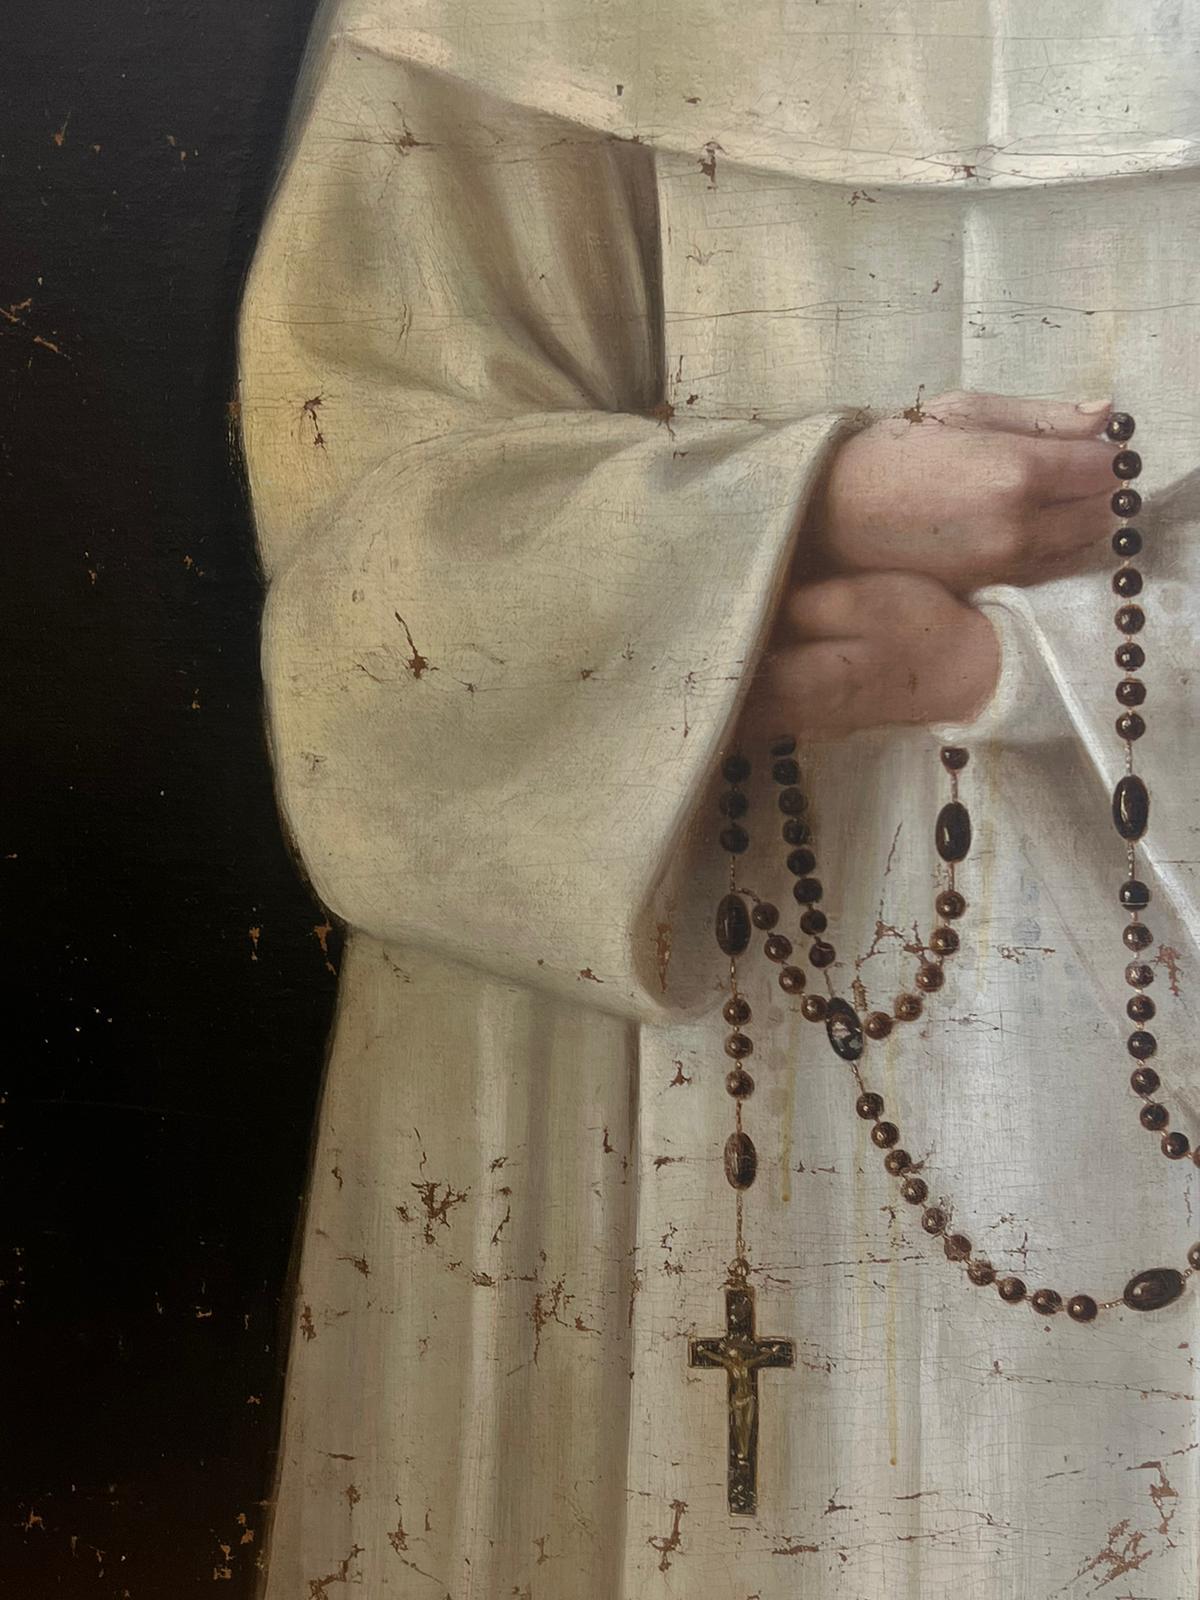 Portrait of a Nun
French School, 19th century
oil painting on canvas, unframed
canvas : 45.5 x 34.5 inches
provenance: private collection, Versailles
condition: the painting is in very sound and structurally good condition; the canvas has been